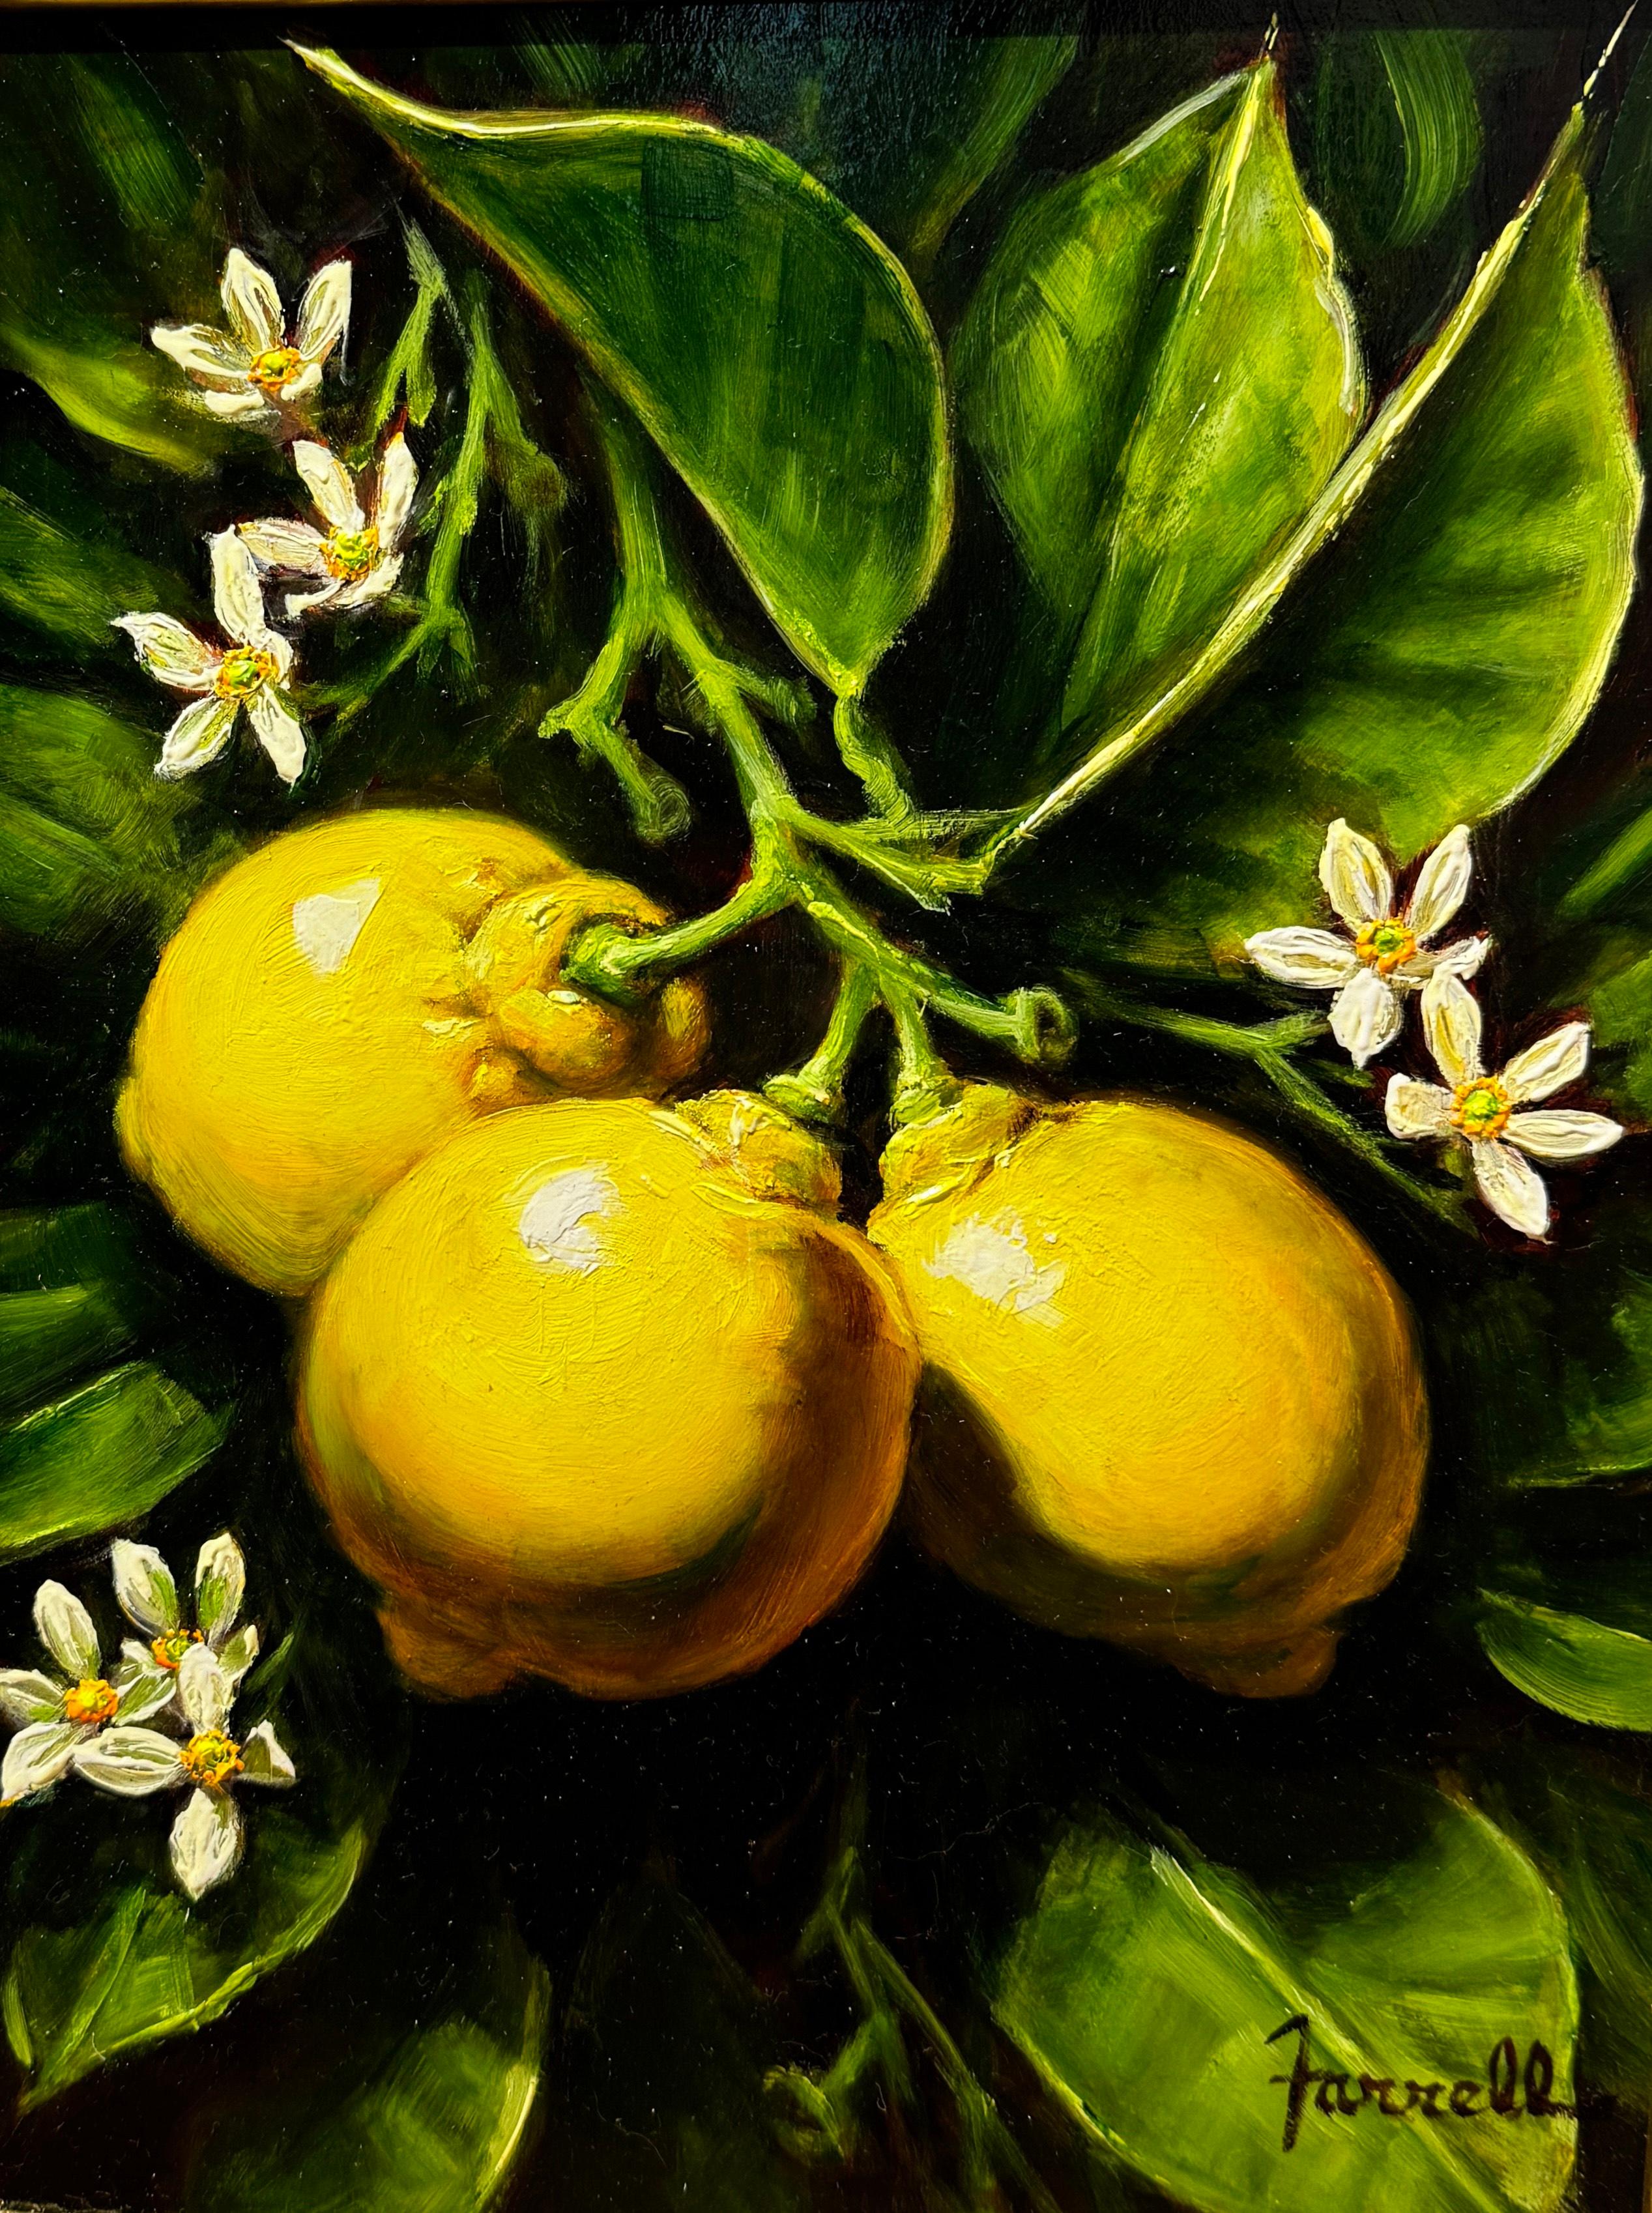 "Sweet Lemon Blossoms", is a 12x9 oil painting on board by artist Sean Farrell. Featured is an arrangement of three lemons, still on the stem with their leaves. The gentle organic curves of the leaves create movement and flow in this harmonious